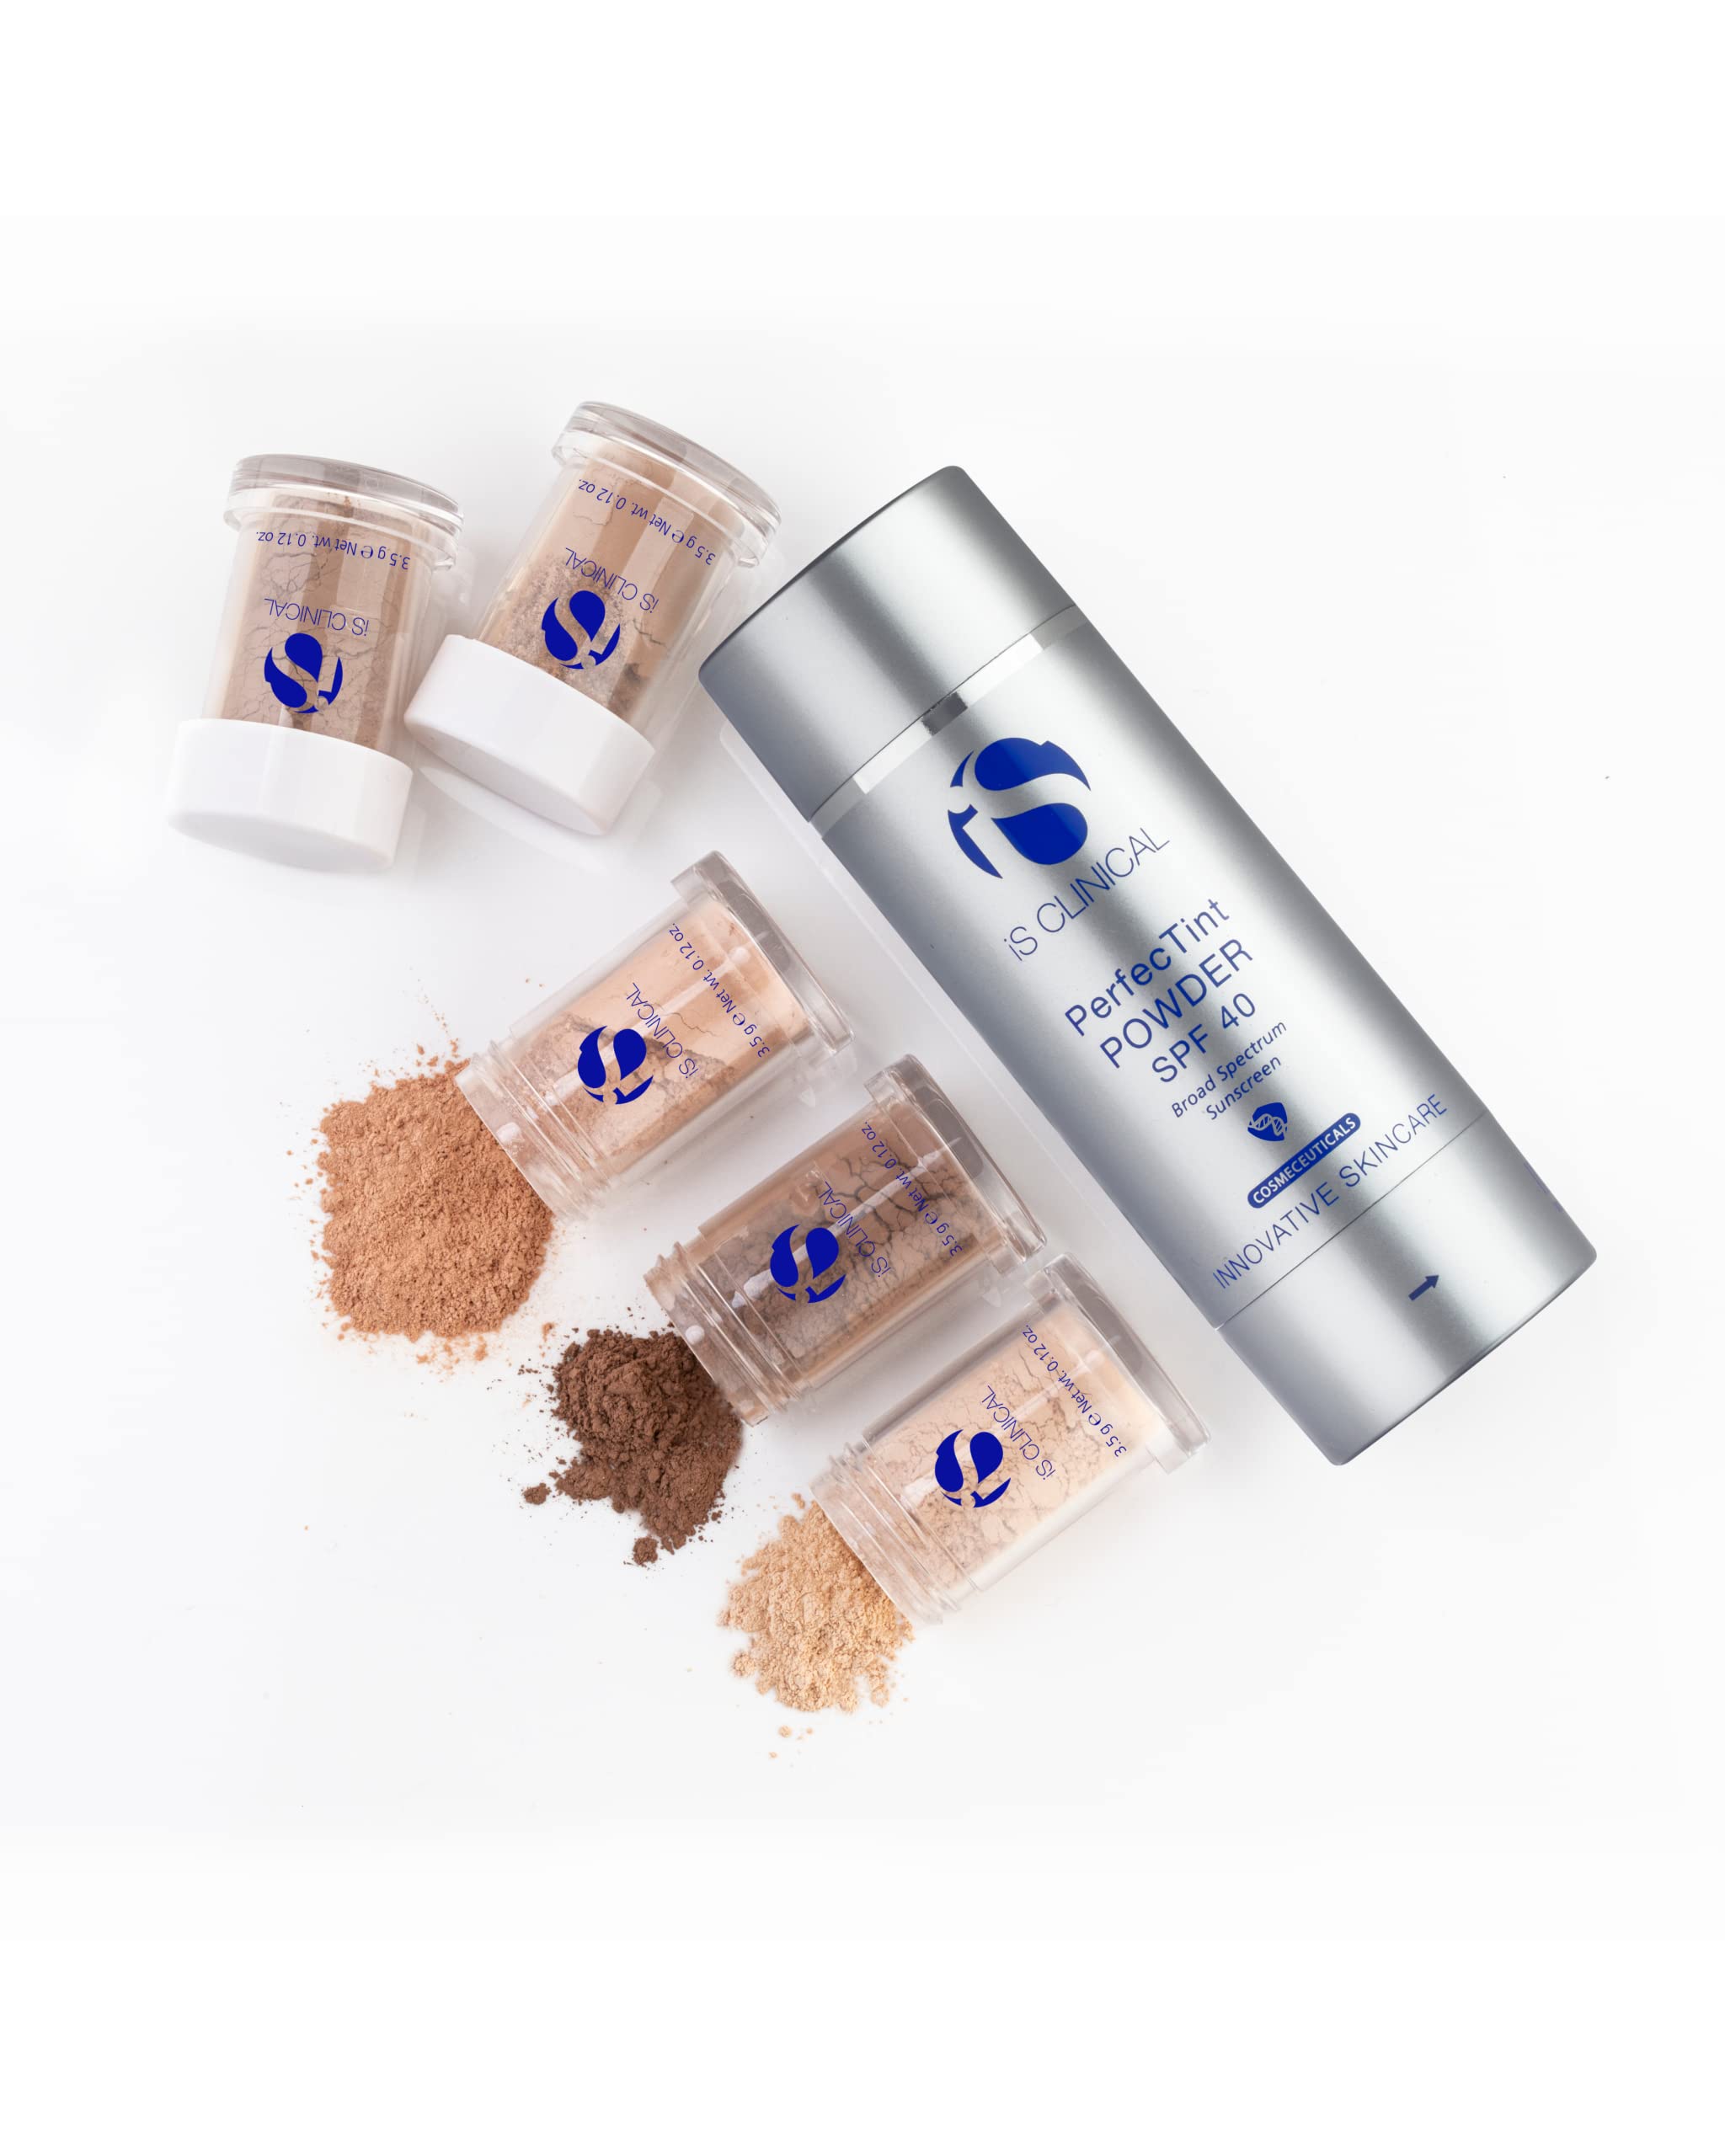 iS CLINICAL PerfecTint Powder SPF 40; Face Powder; Tinted SPF; Loose Face Powder for after makeup application